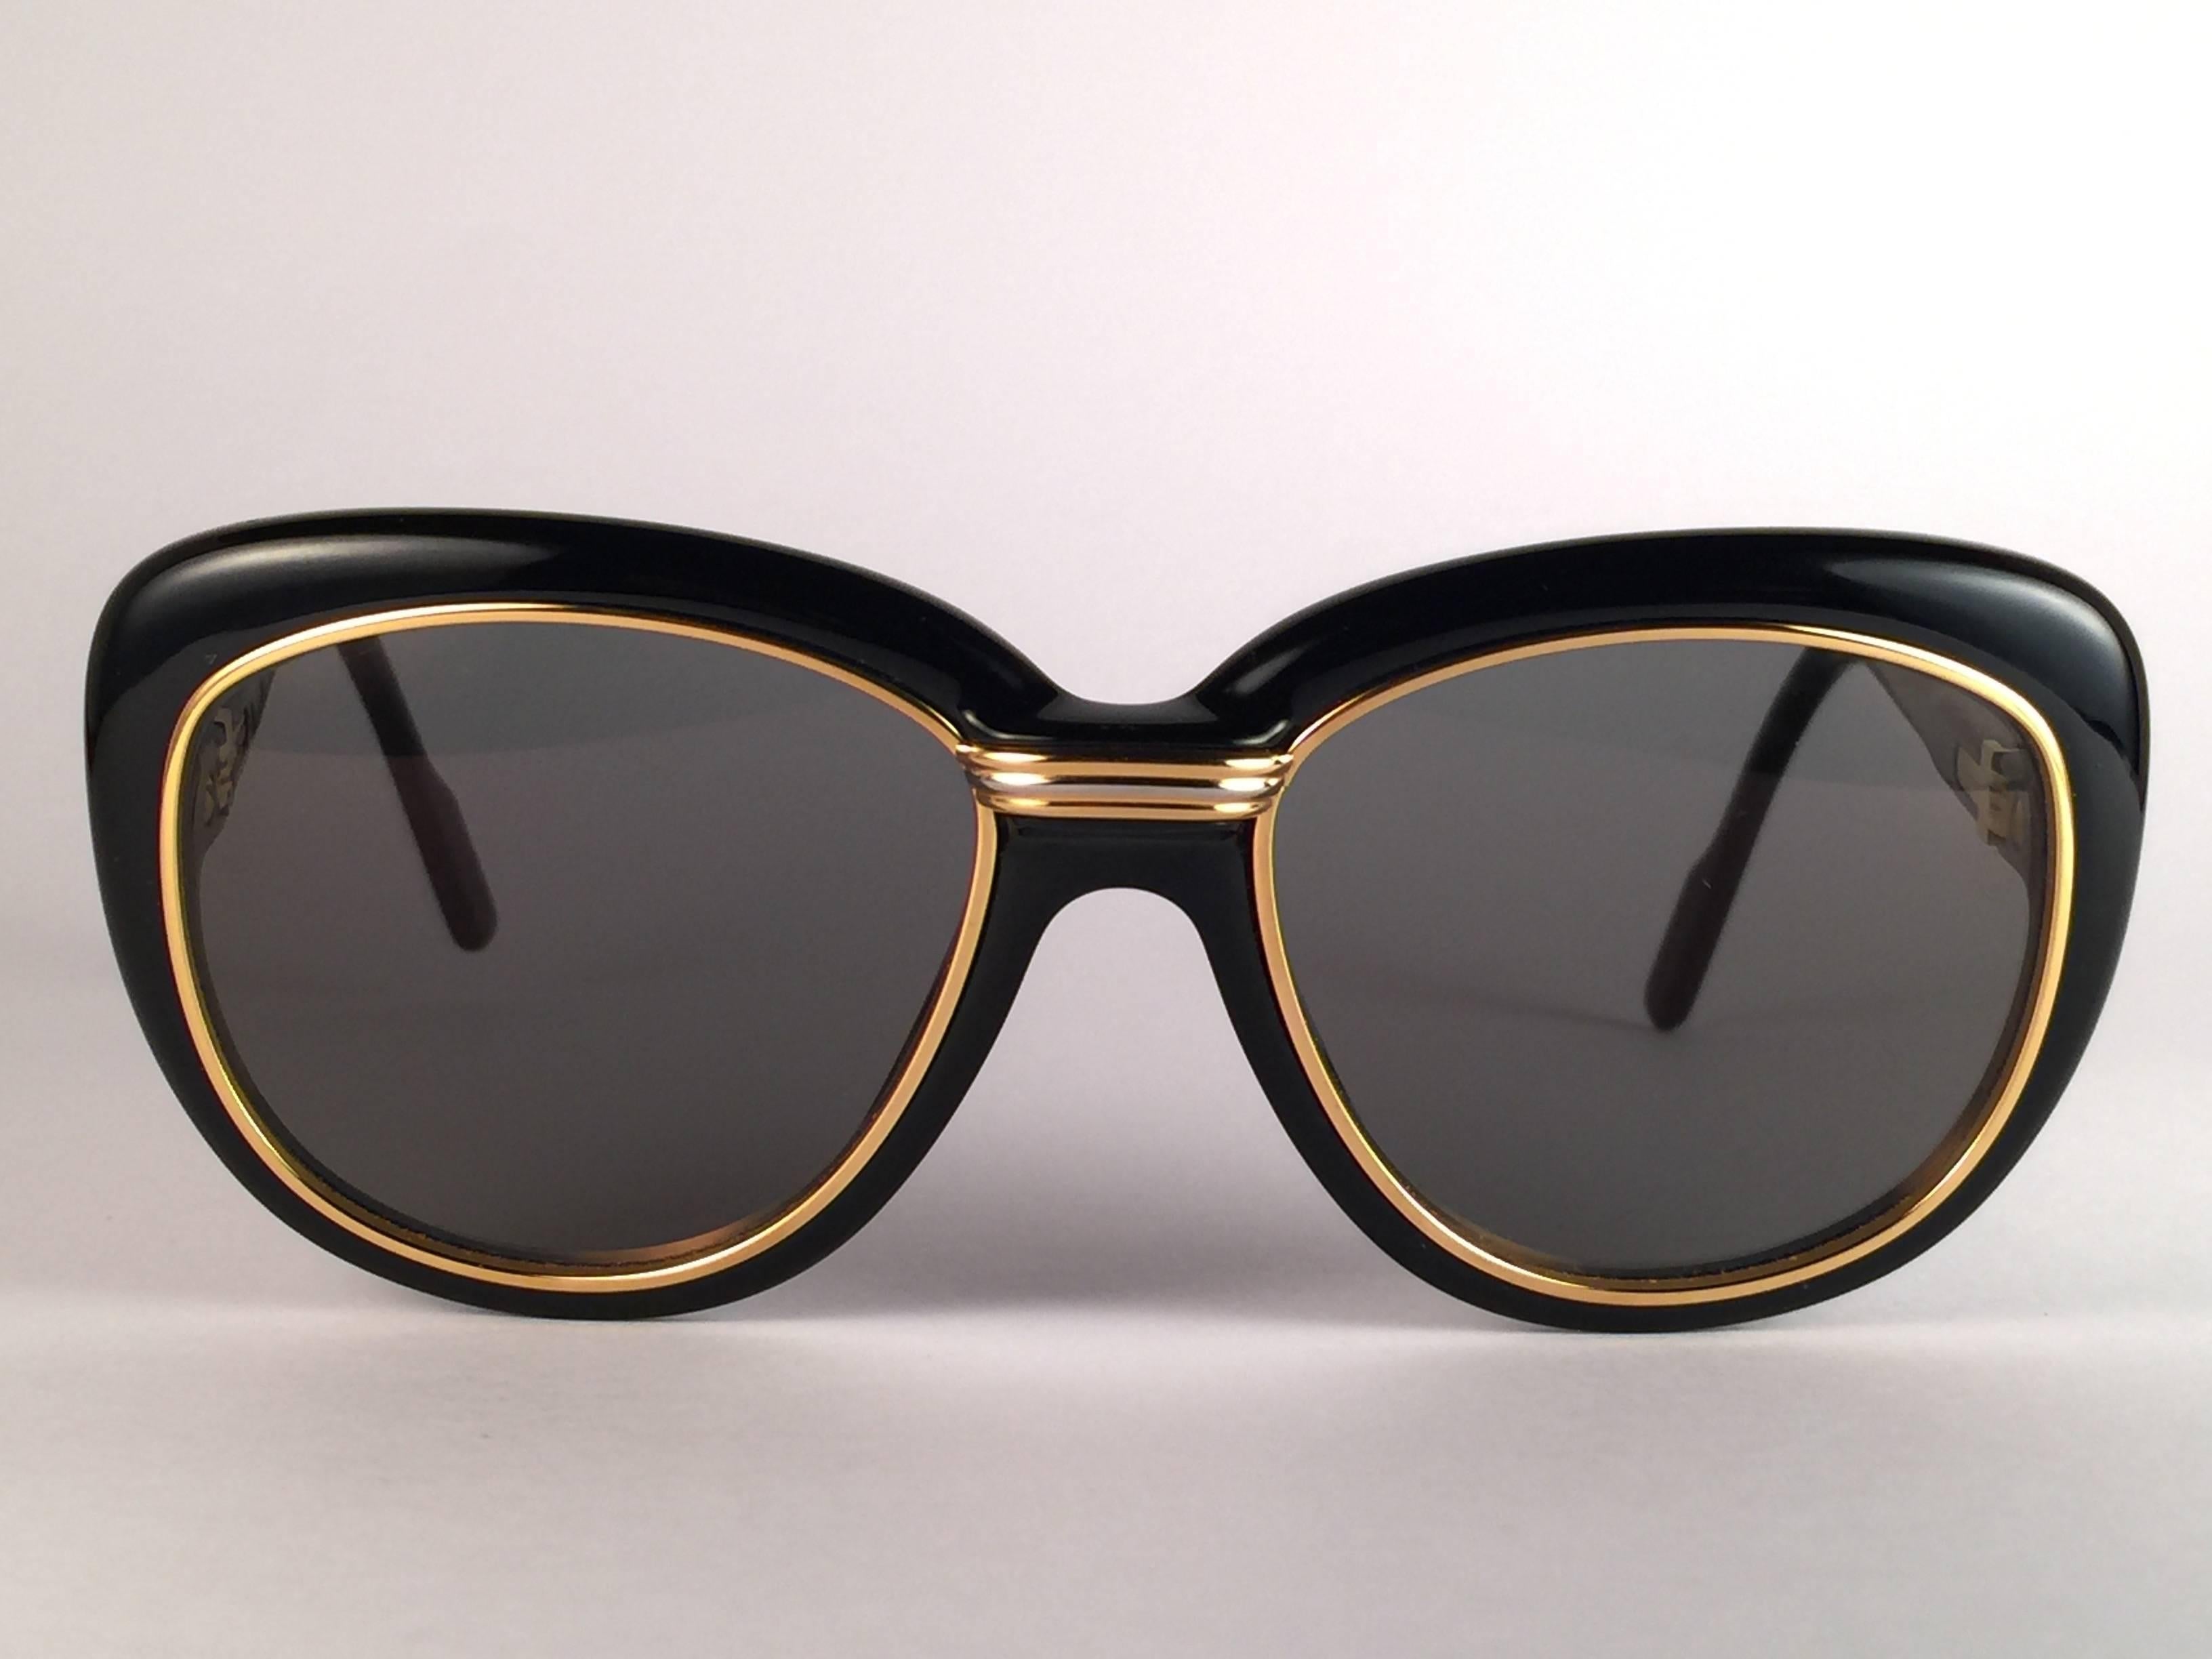 New Vintage Cartier Conquete 51mm Black Gold & Yellow Inserts France Sunglasses 1